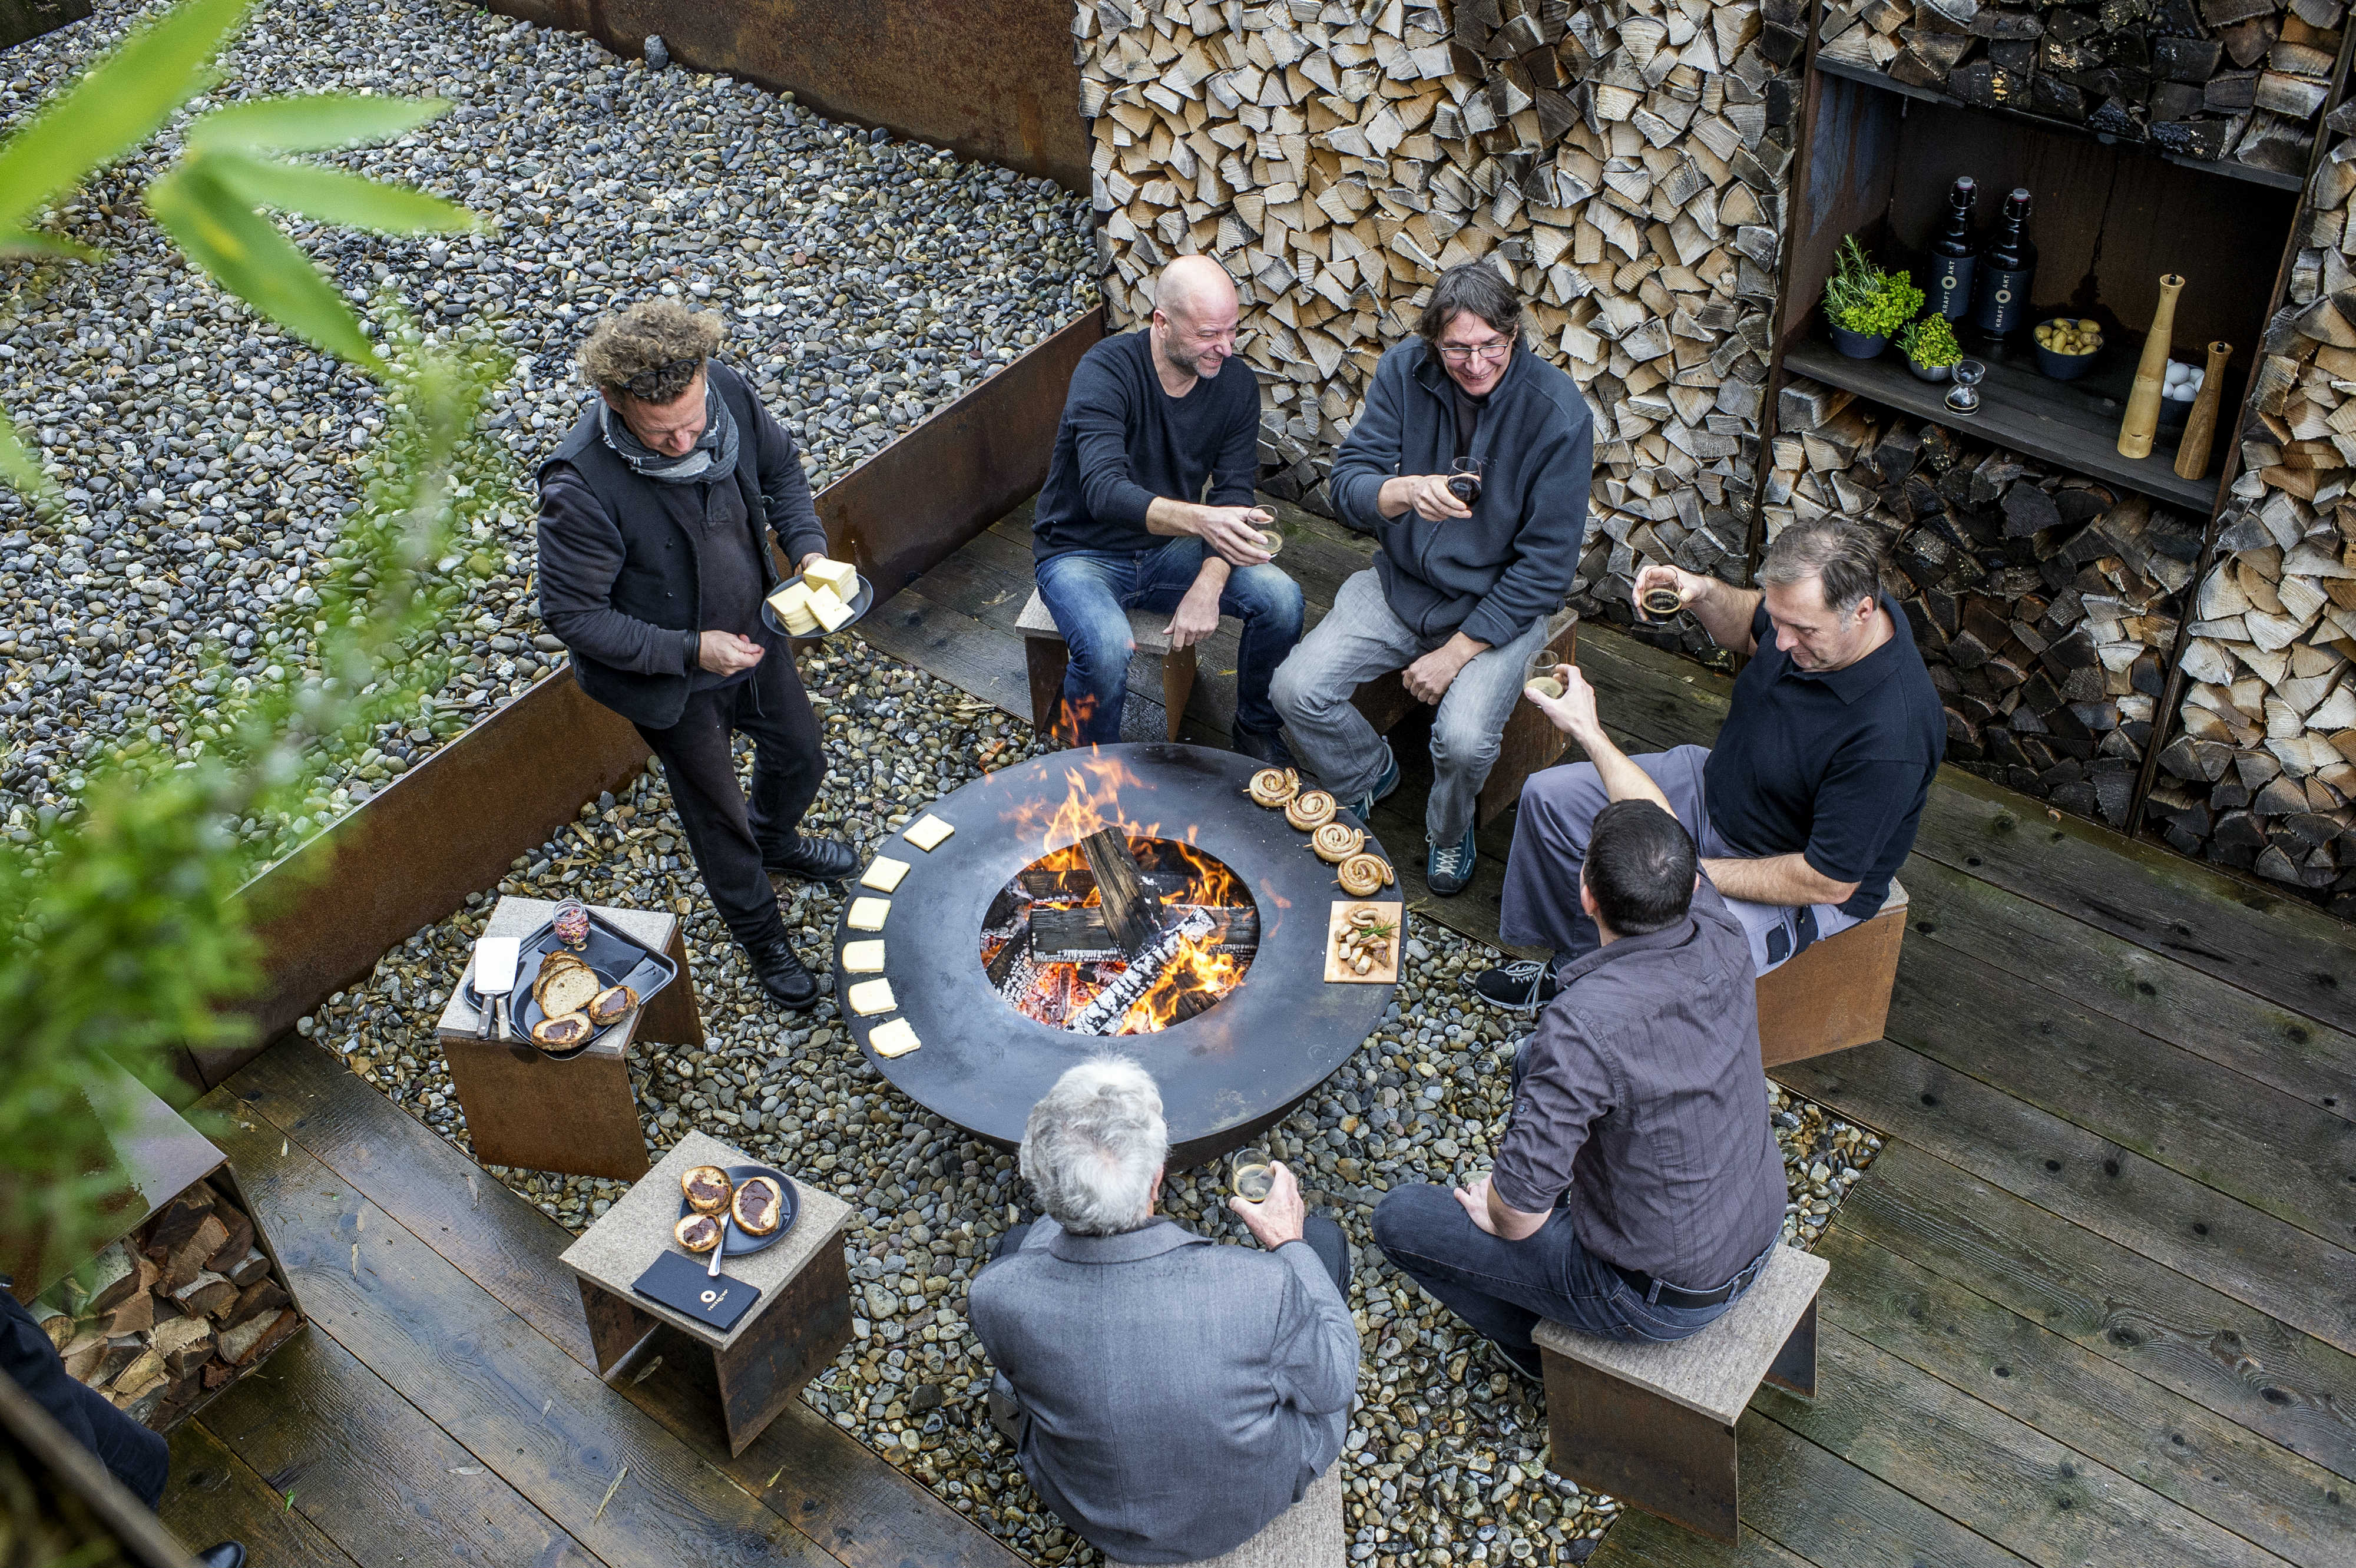 A group of people sitting around a Feuerring having a good time